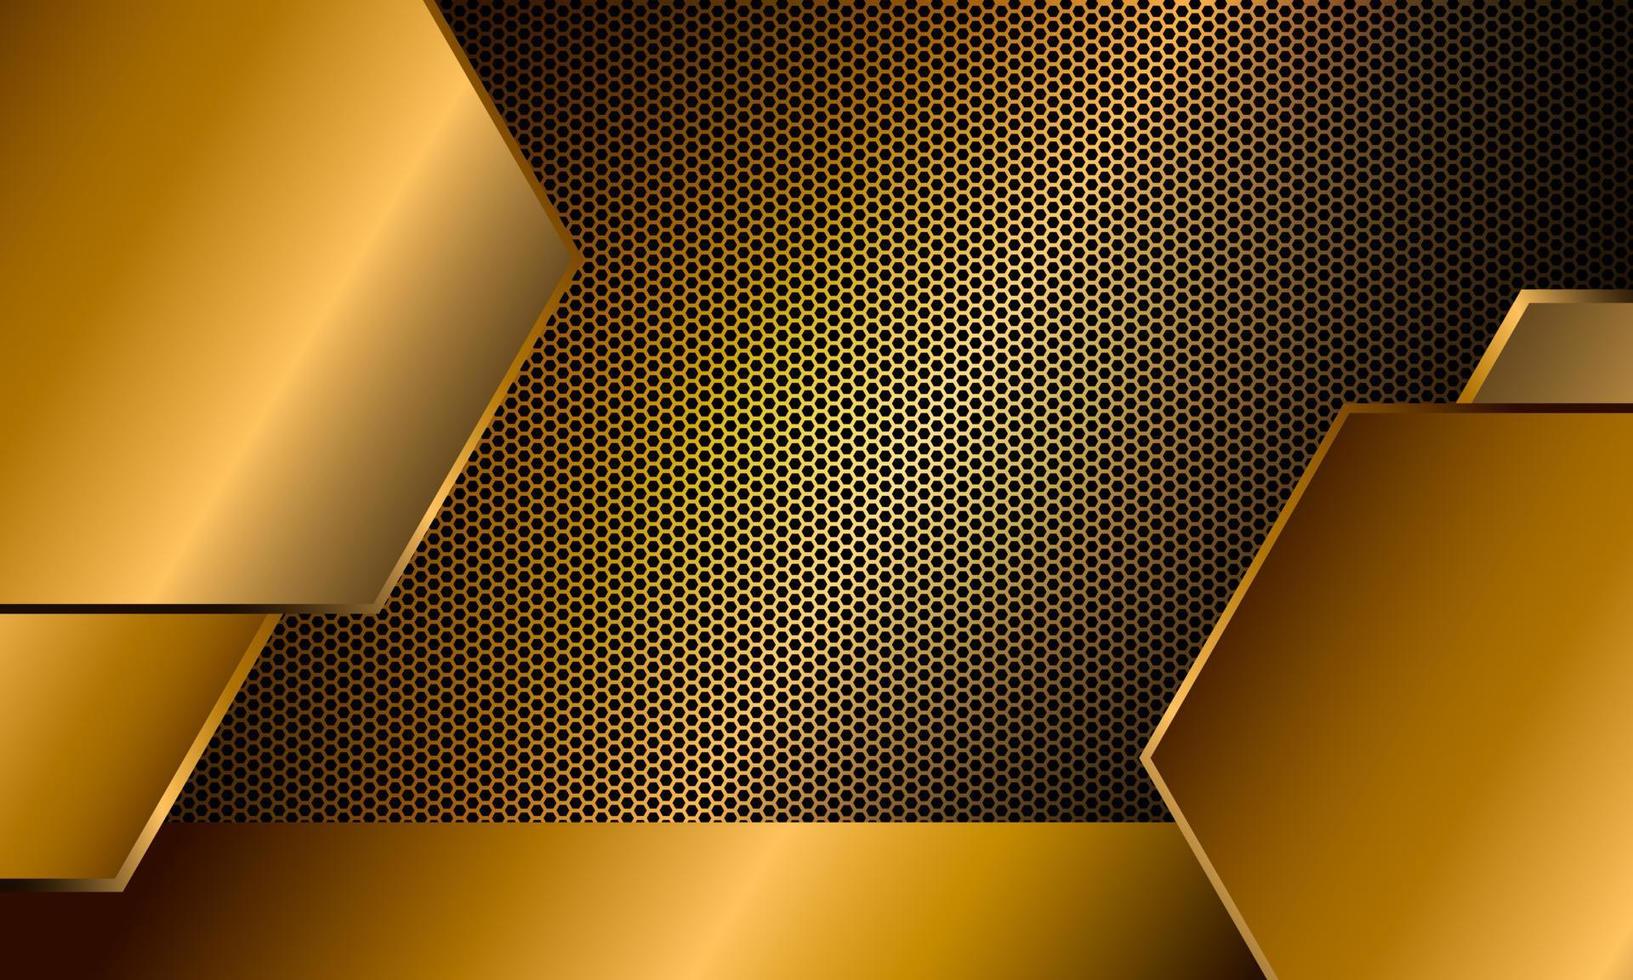 Abstract gold metal on gold hexagon mesh design modern luxury technology background, vector illustration.